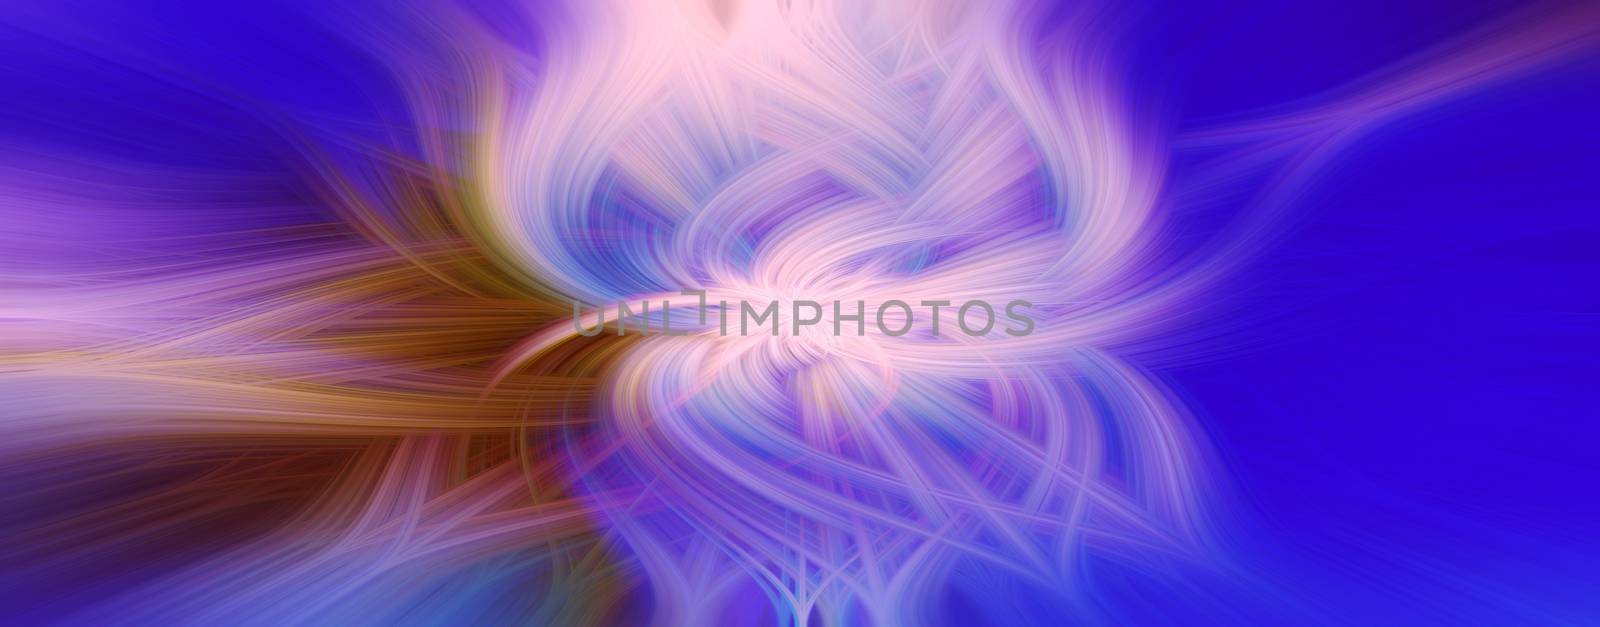 Beautiful abstract intertwined 3d fibers forming an ornament made of various shapes. Pink, purple, yellow, and blue colors. Blue background. Illustration. Panorama size.